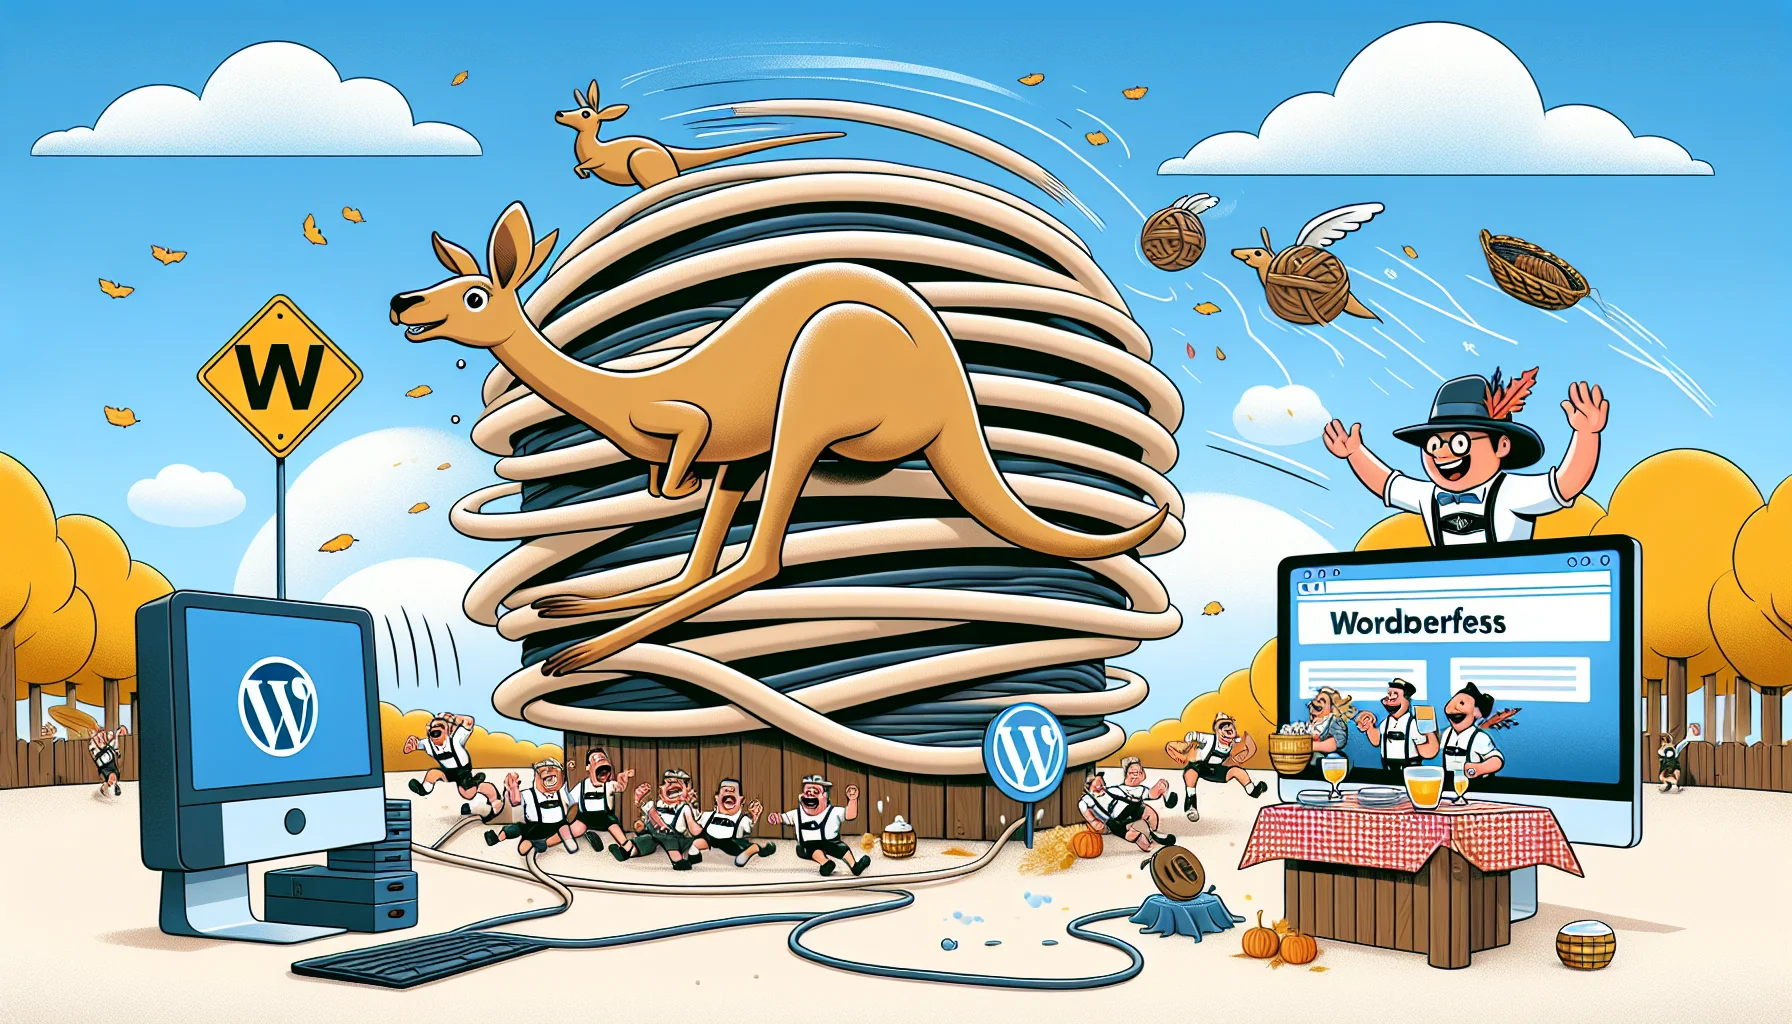 A humorous scene illustrating the concept of WordPress hosting in Germany. In the middle of the image, a kangaroo symbolizing fast server speed is leaping over a large network of knots and wires, depicting internet connectivity. An Oktoberfest banner hangs in the background, signifying Germany. Adjacent to the kangaroo, a computer screen shows a cheerful smiley and the WordPress logo, suggesting a user-friendly and efficient hosting service. Extra elements adding to the hilarity can be traditional German dishes confusingly trying to connect to the network cables or Bavarian men trying to dance to the rhythm of continuous data flow.